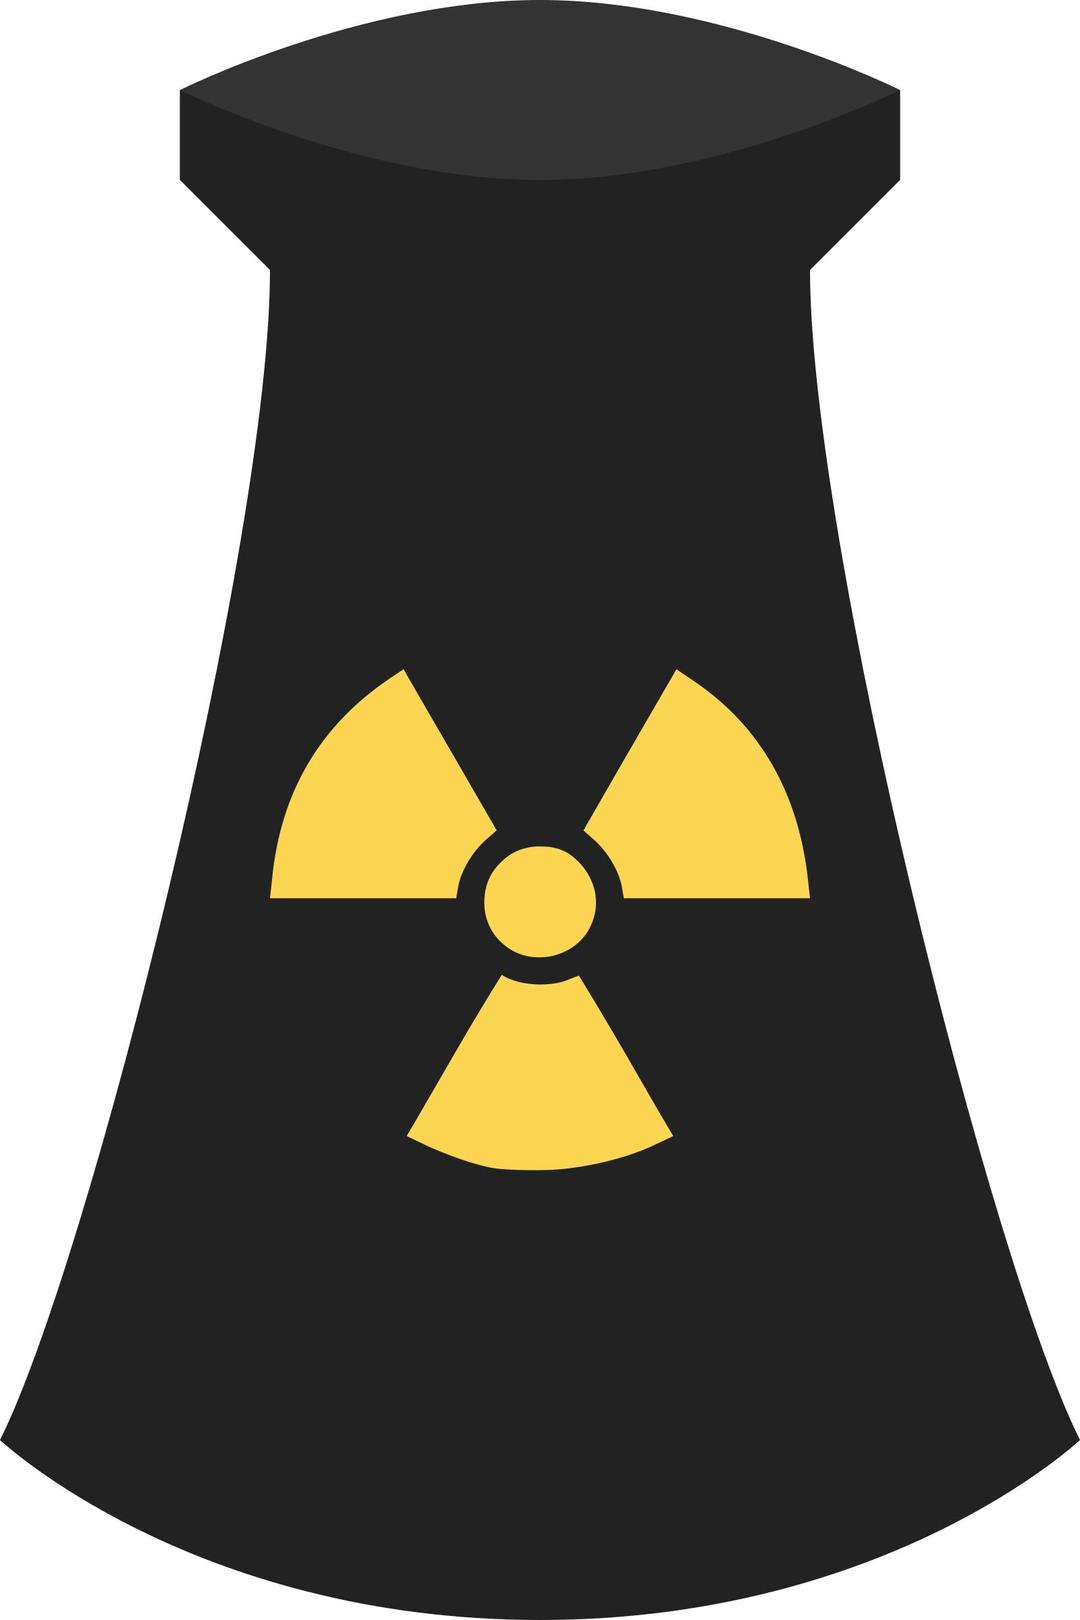 Nuclear Power Plant Icon Symbol 3 png transparent